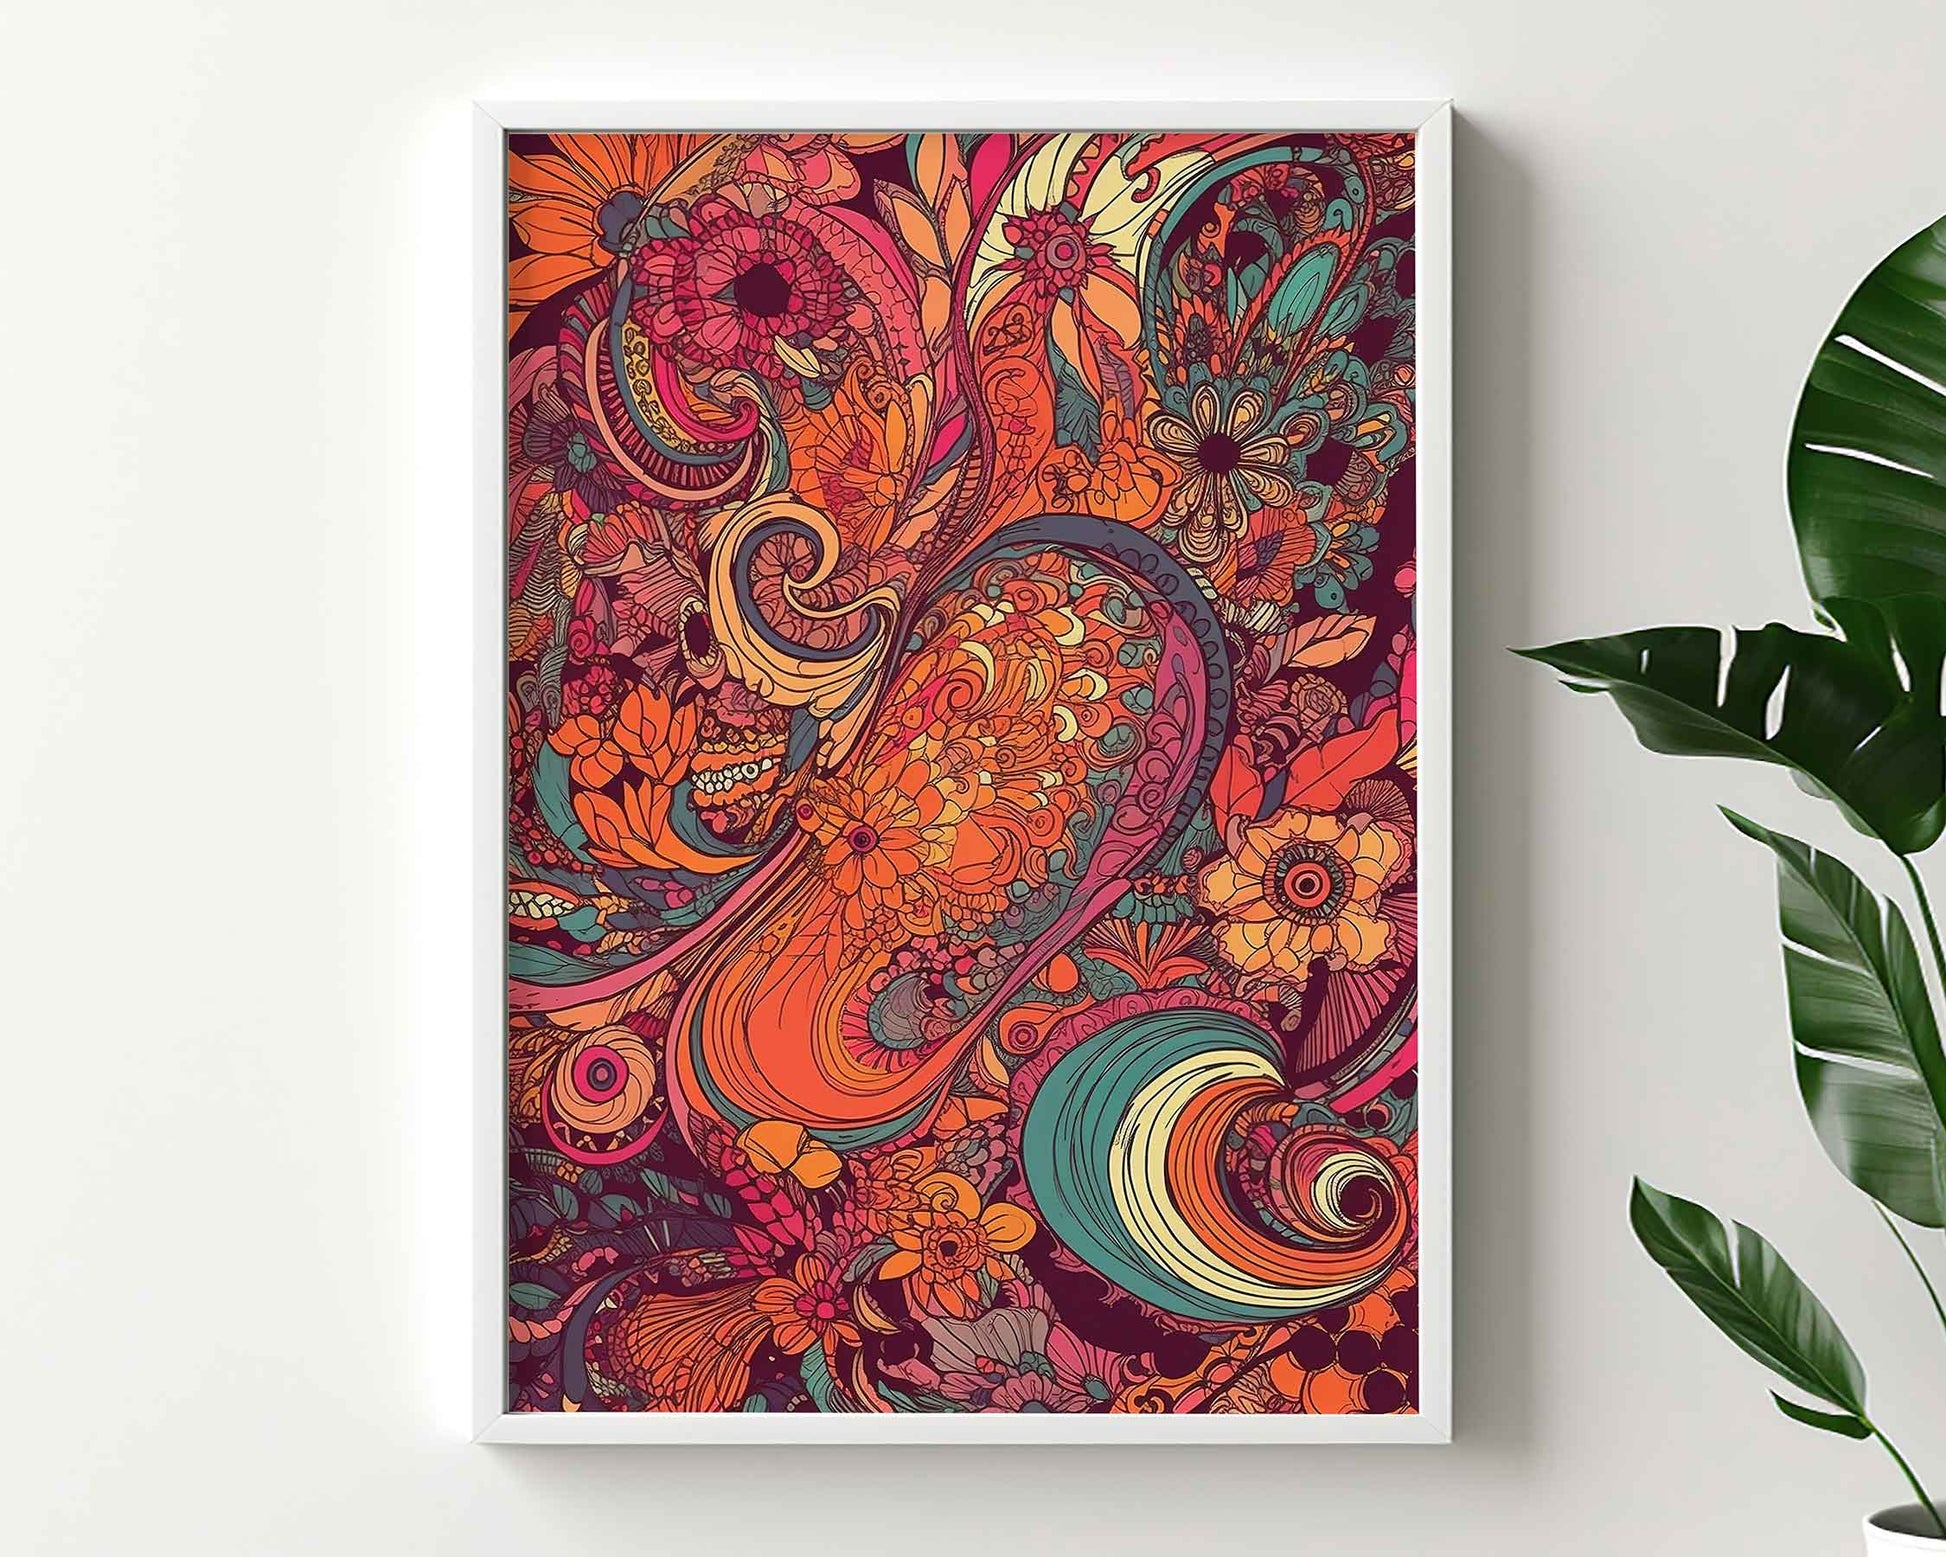 Framed Image of Parisian Vintage Art Nouveau 70s Psychedelic Wall Art Poster Print